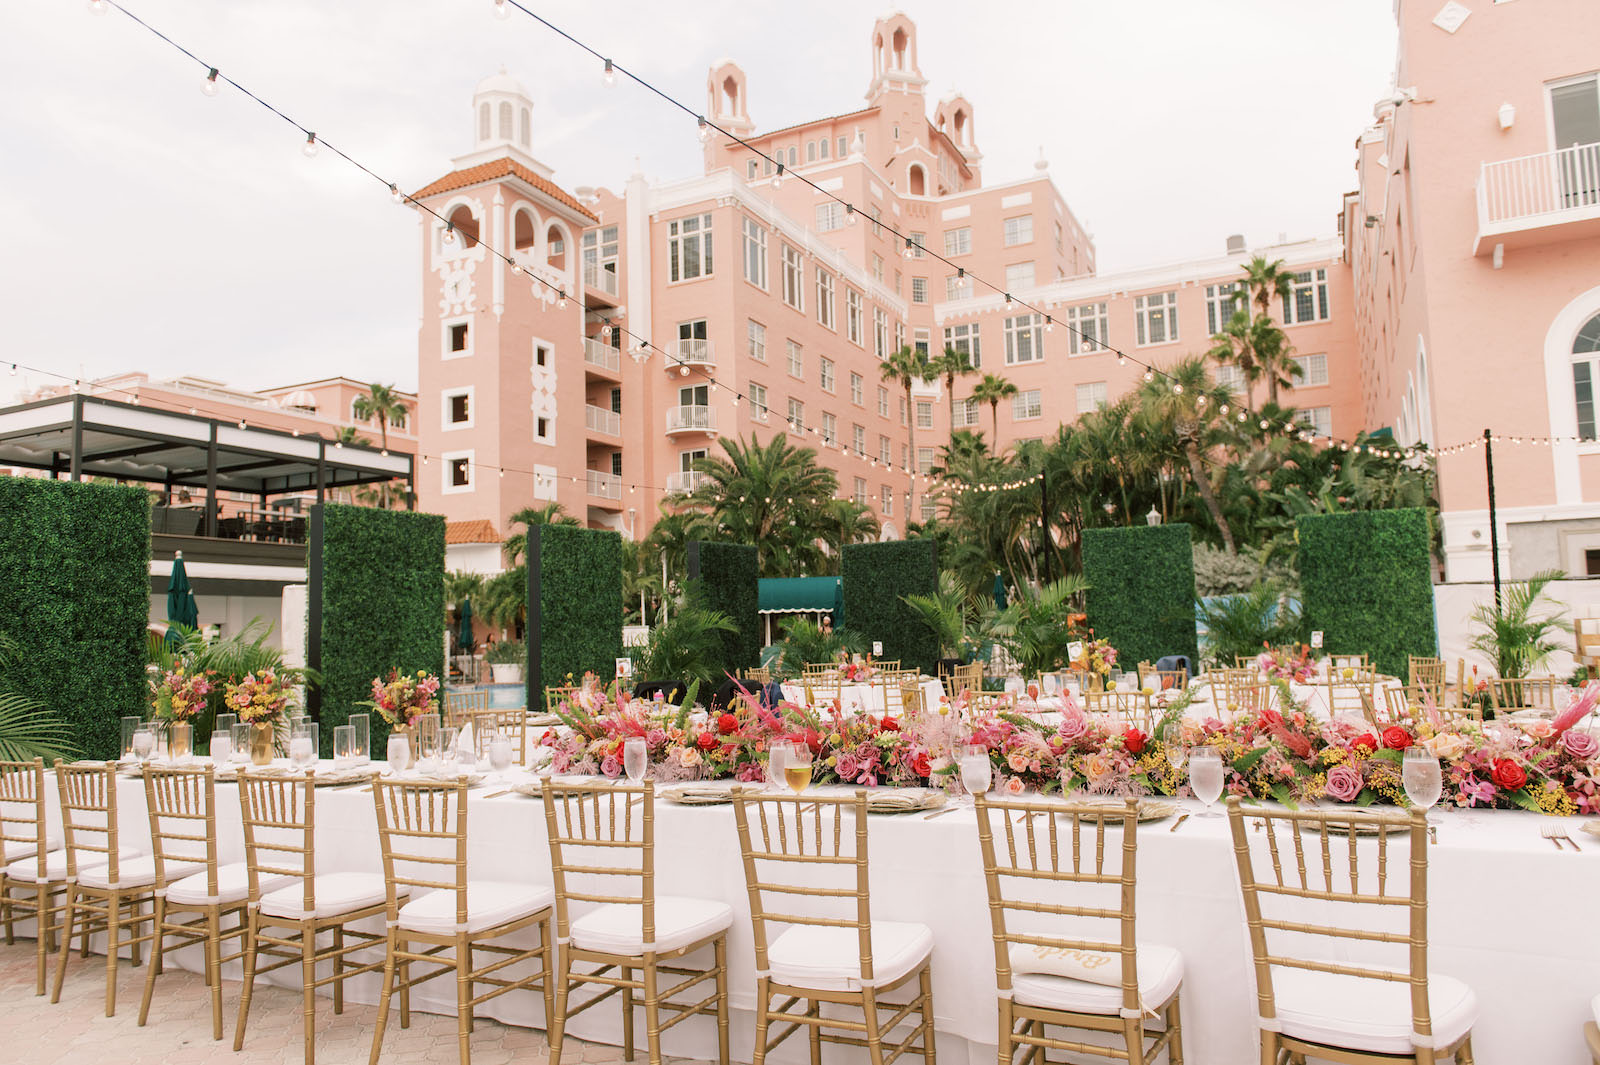 Vibrant Boho Wedding Reception Decor, Wedding Party Head Table, Gold Chiavari Chairs, Low Hot Pink and Red Roses, Pampas Grass Low Floral Centerpieces, Hanging String Lights, Greenery Hedge Wall | St. Petersburg Historic Wedding Venue The Don CeSar